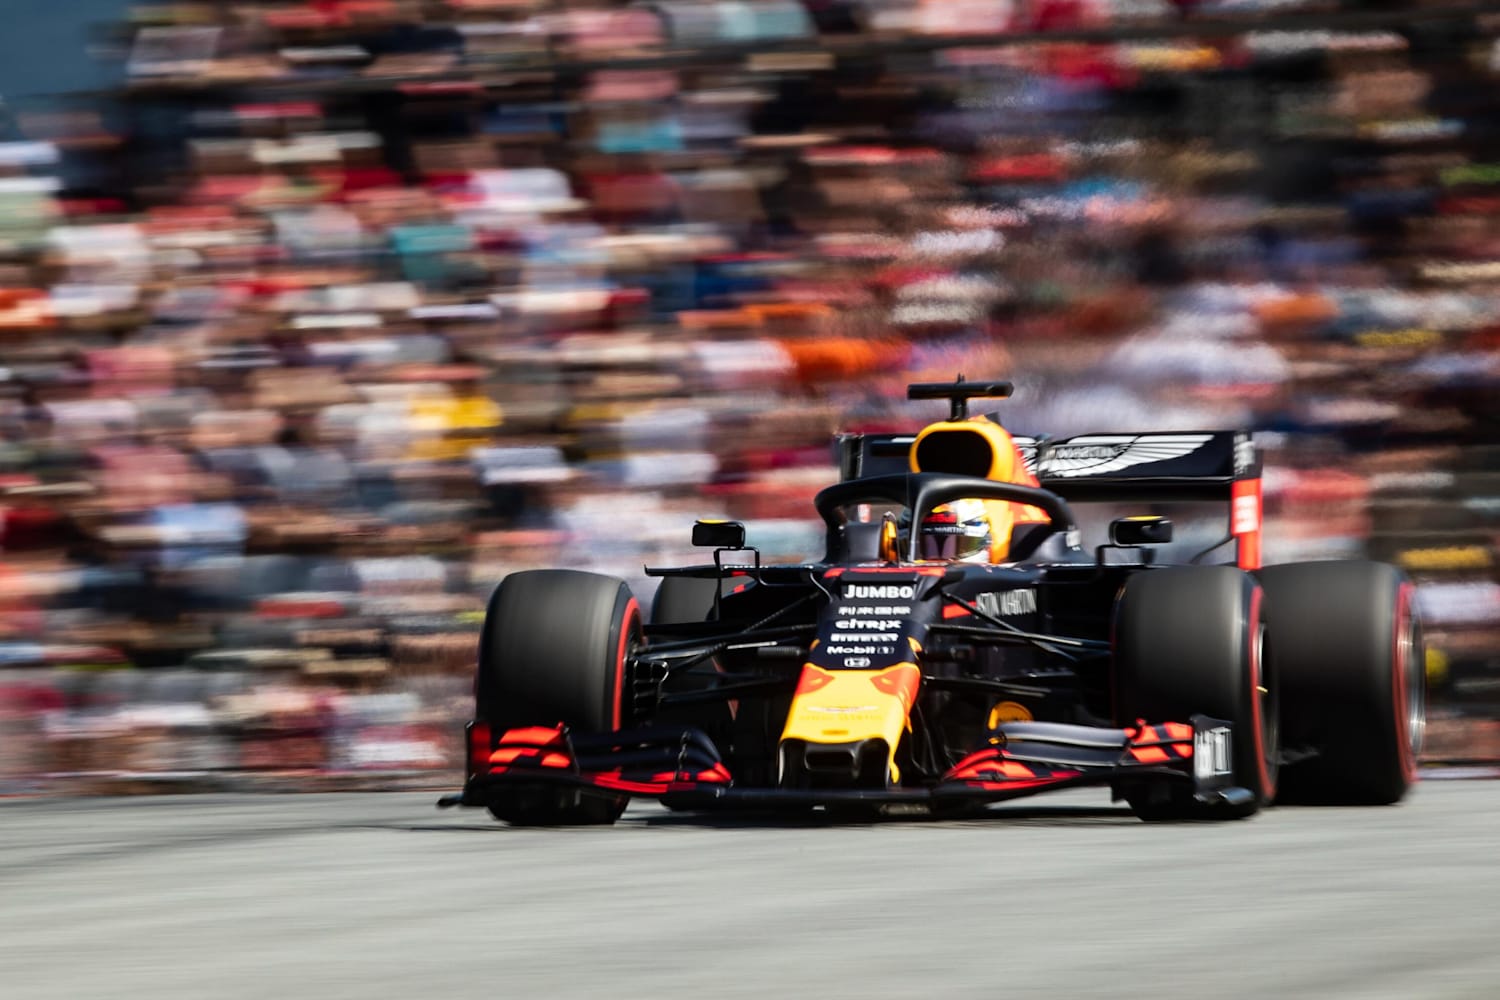 Austrian F1 Grand Prix 2019: Race report and reaction